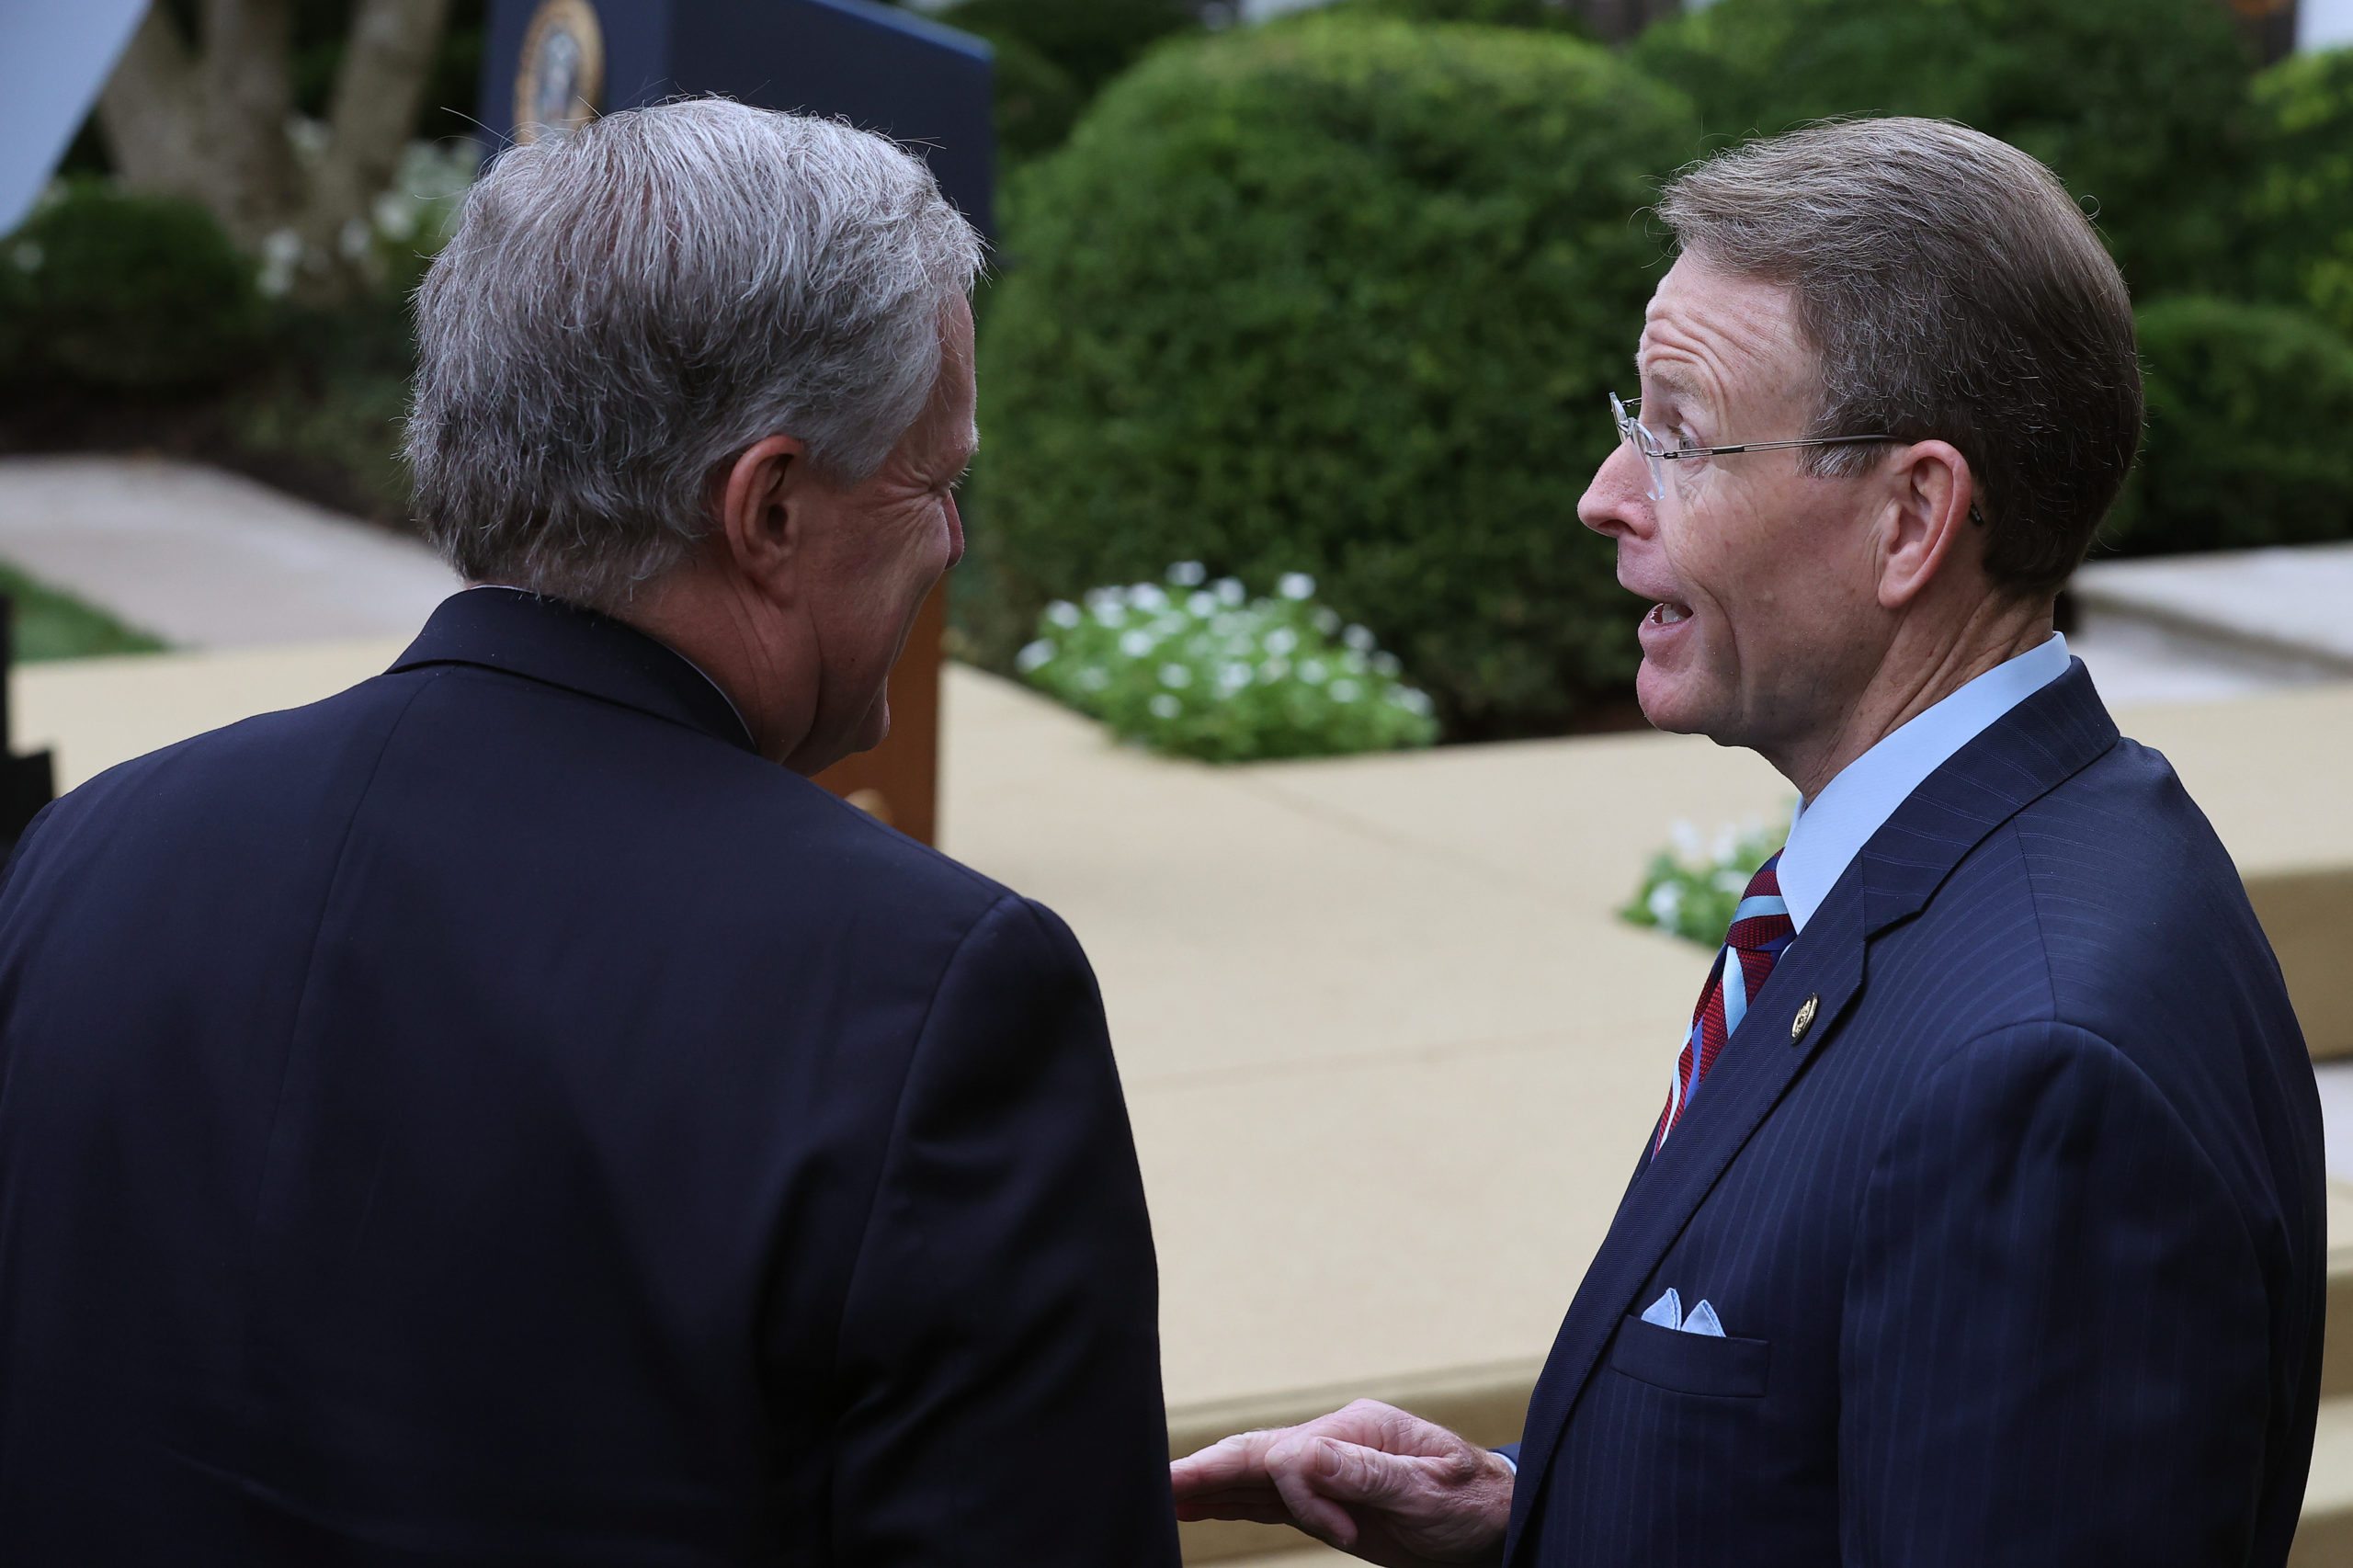 Family Research Council president Tony Perkins talks with White House Chief of Staff Mark Meadows after President Donald Trump introduced Supreme Court nominee Amy Coney Barrett in the Rose Garden at the White House on September 26, 2020 